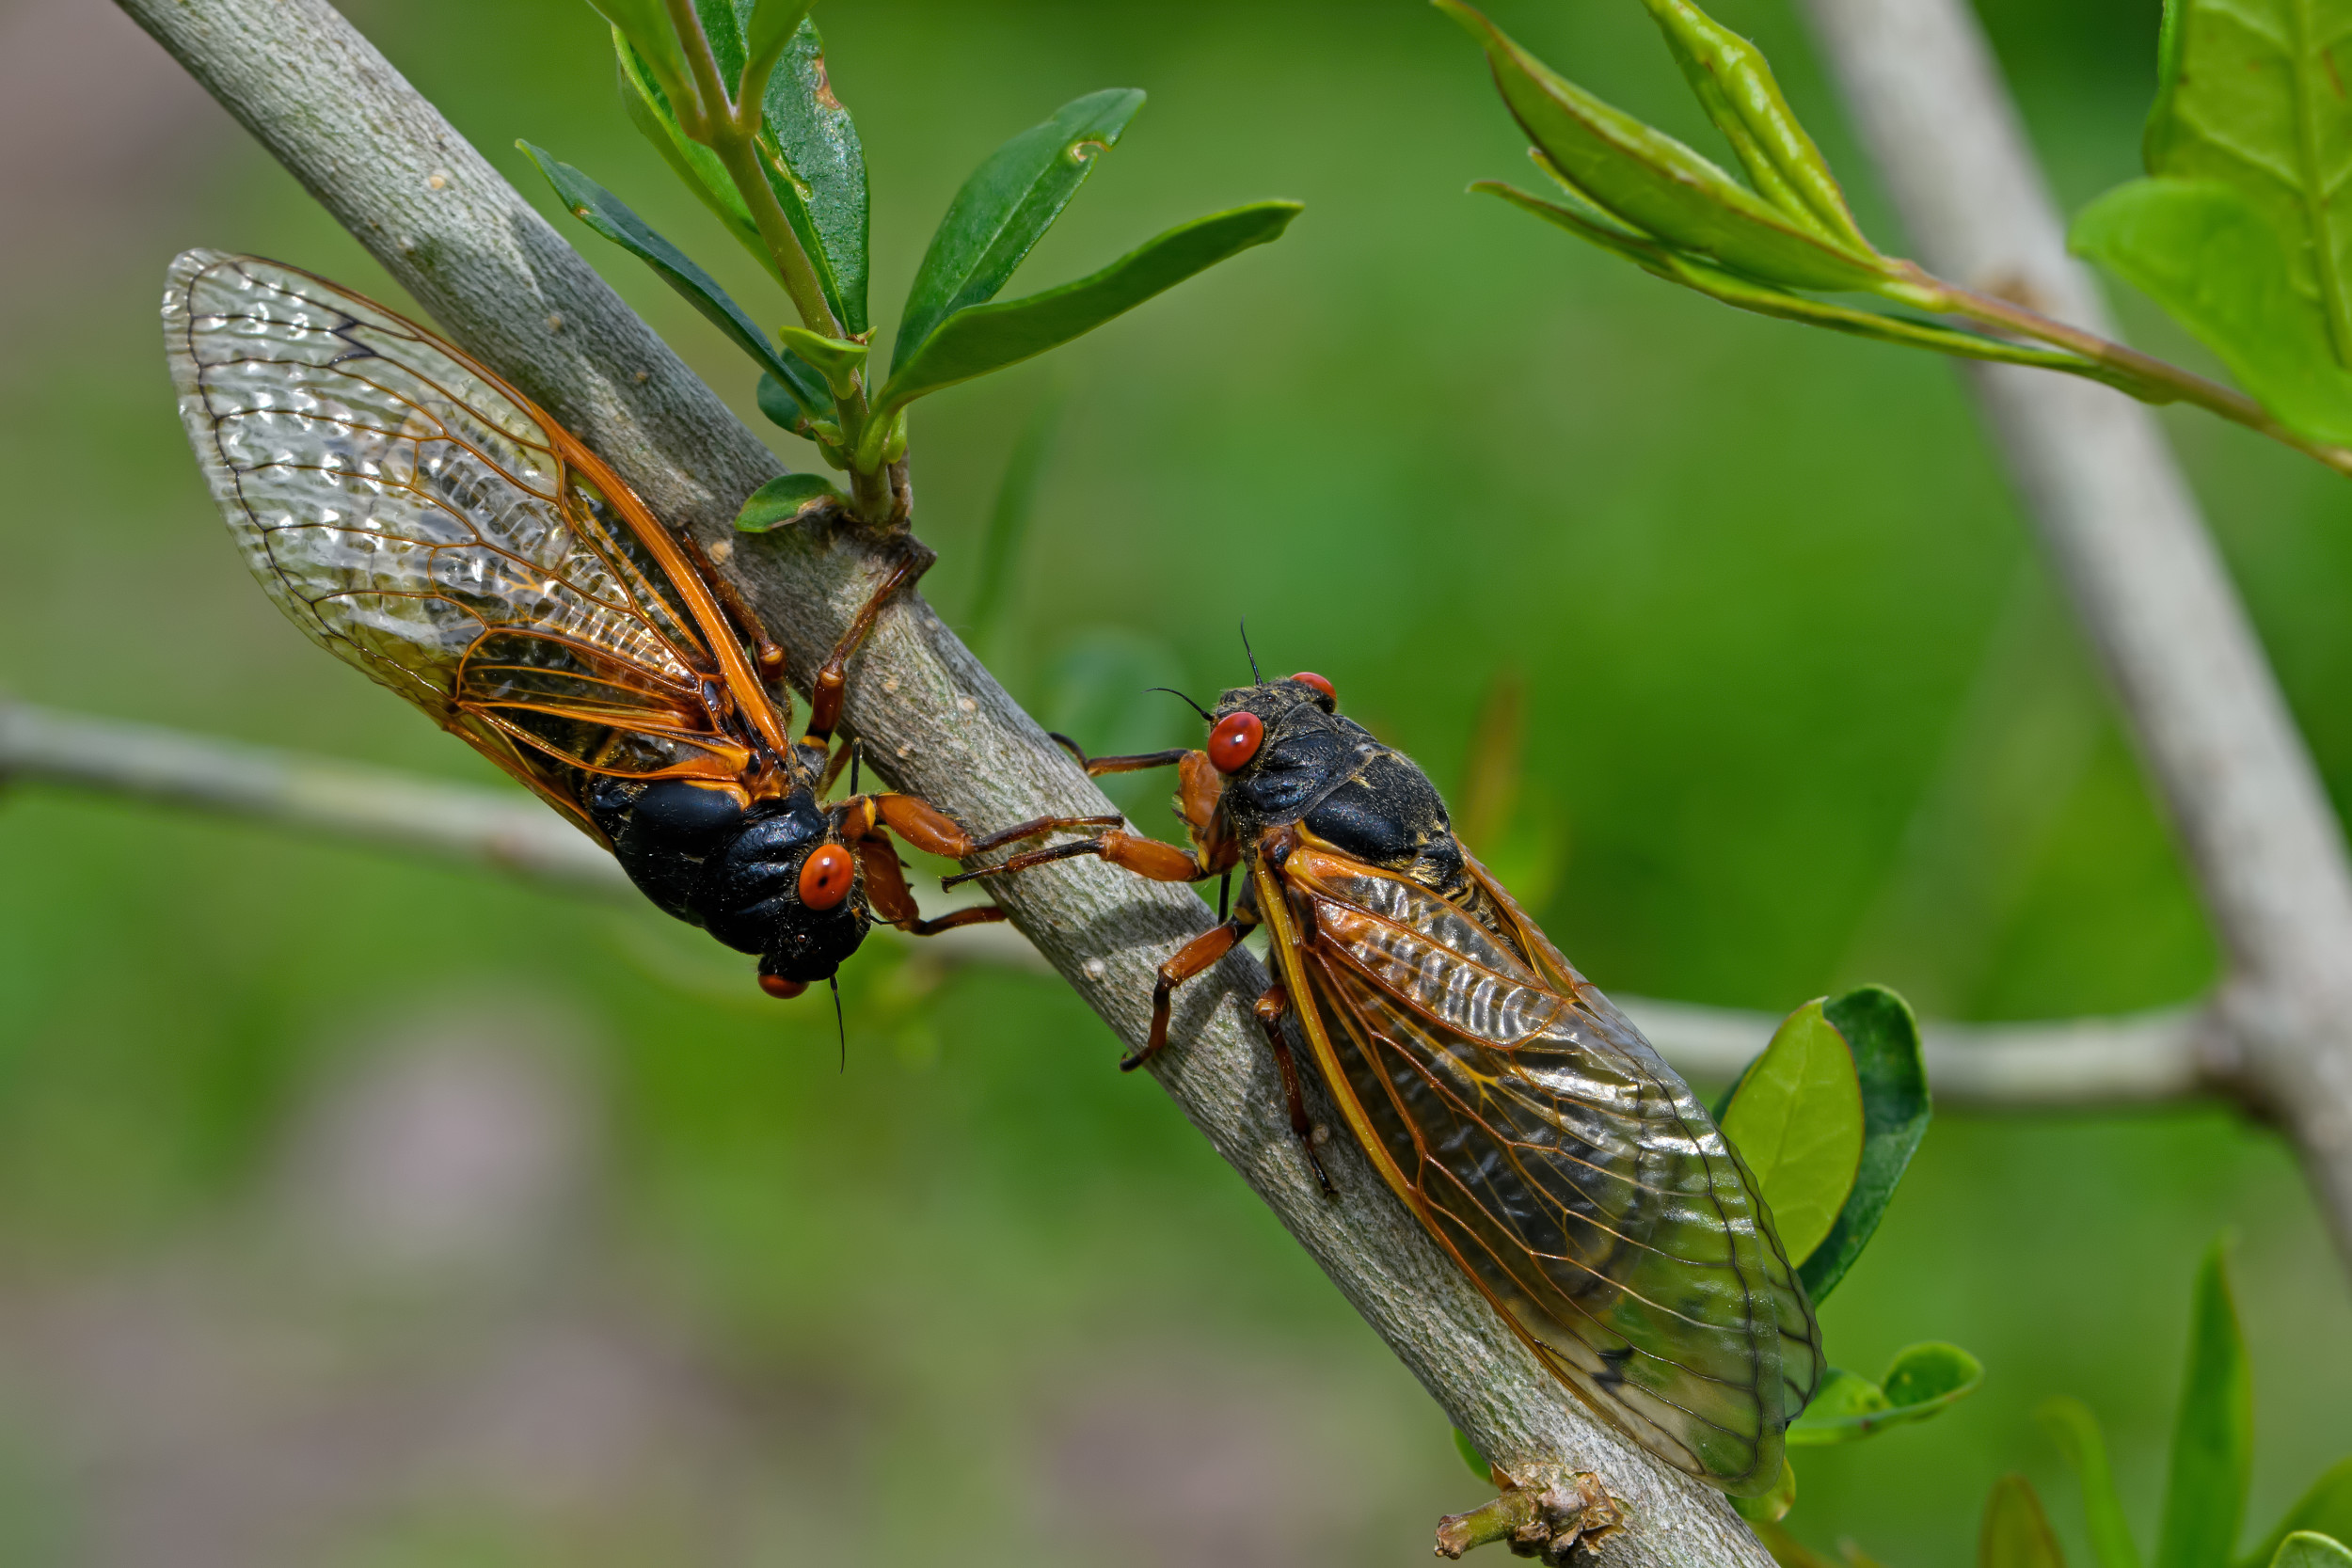 cicada map shows states where broods have emerged